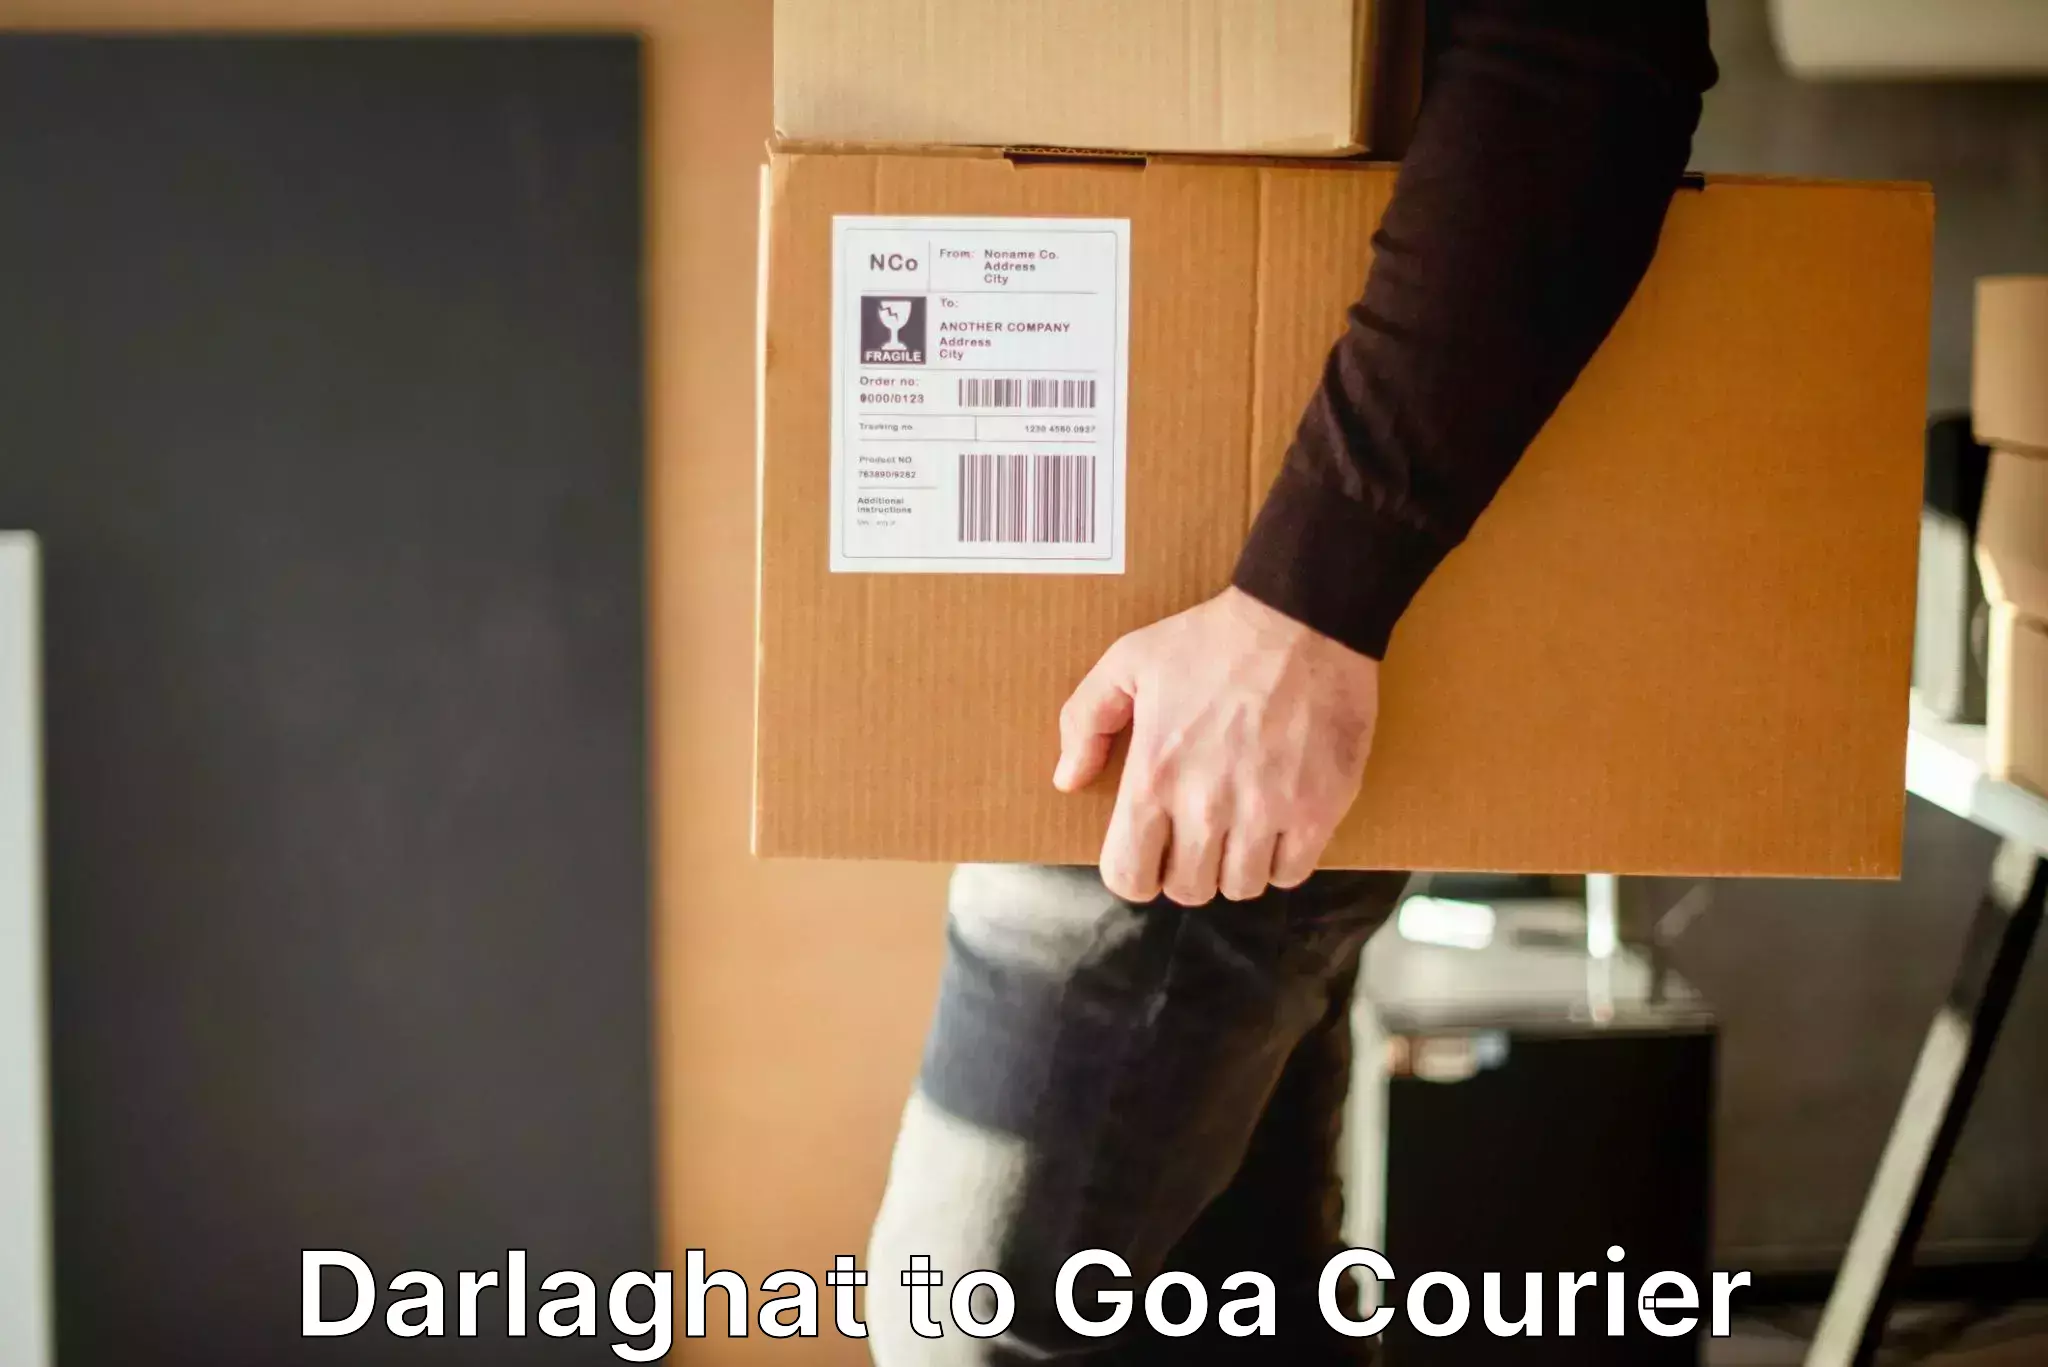 Luggage transport company Darlaghat to Goa